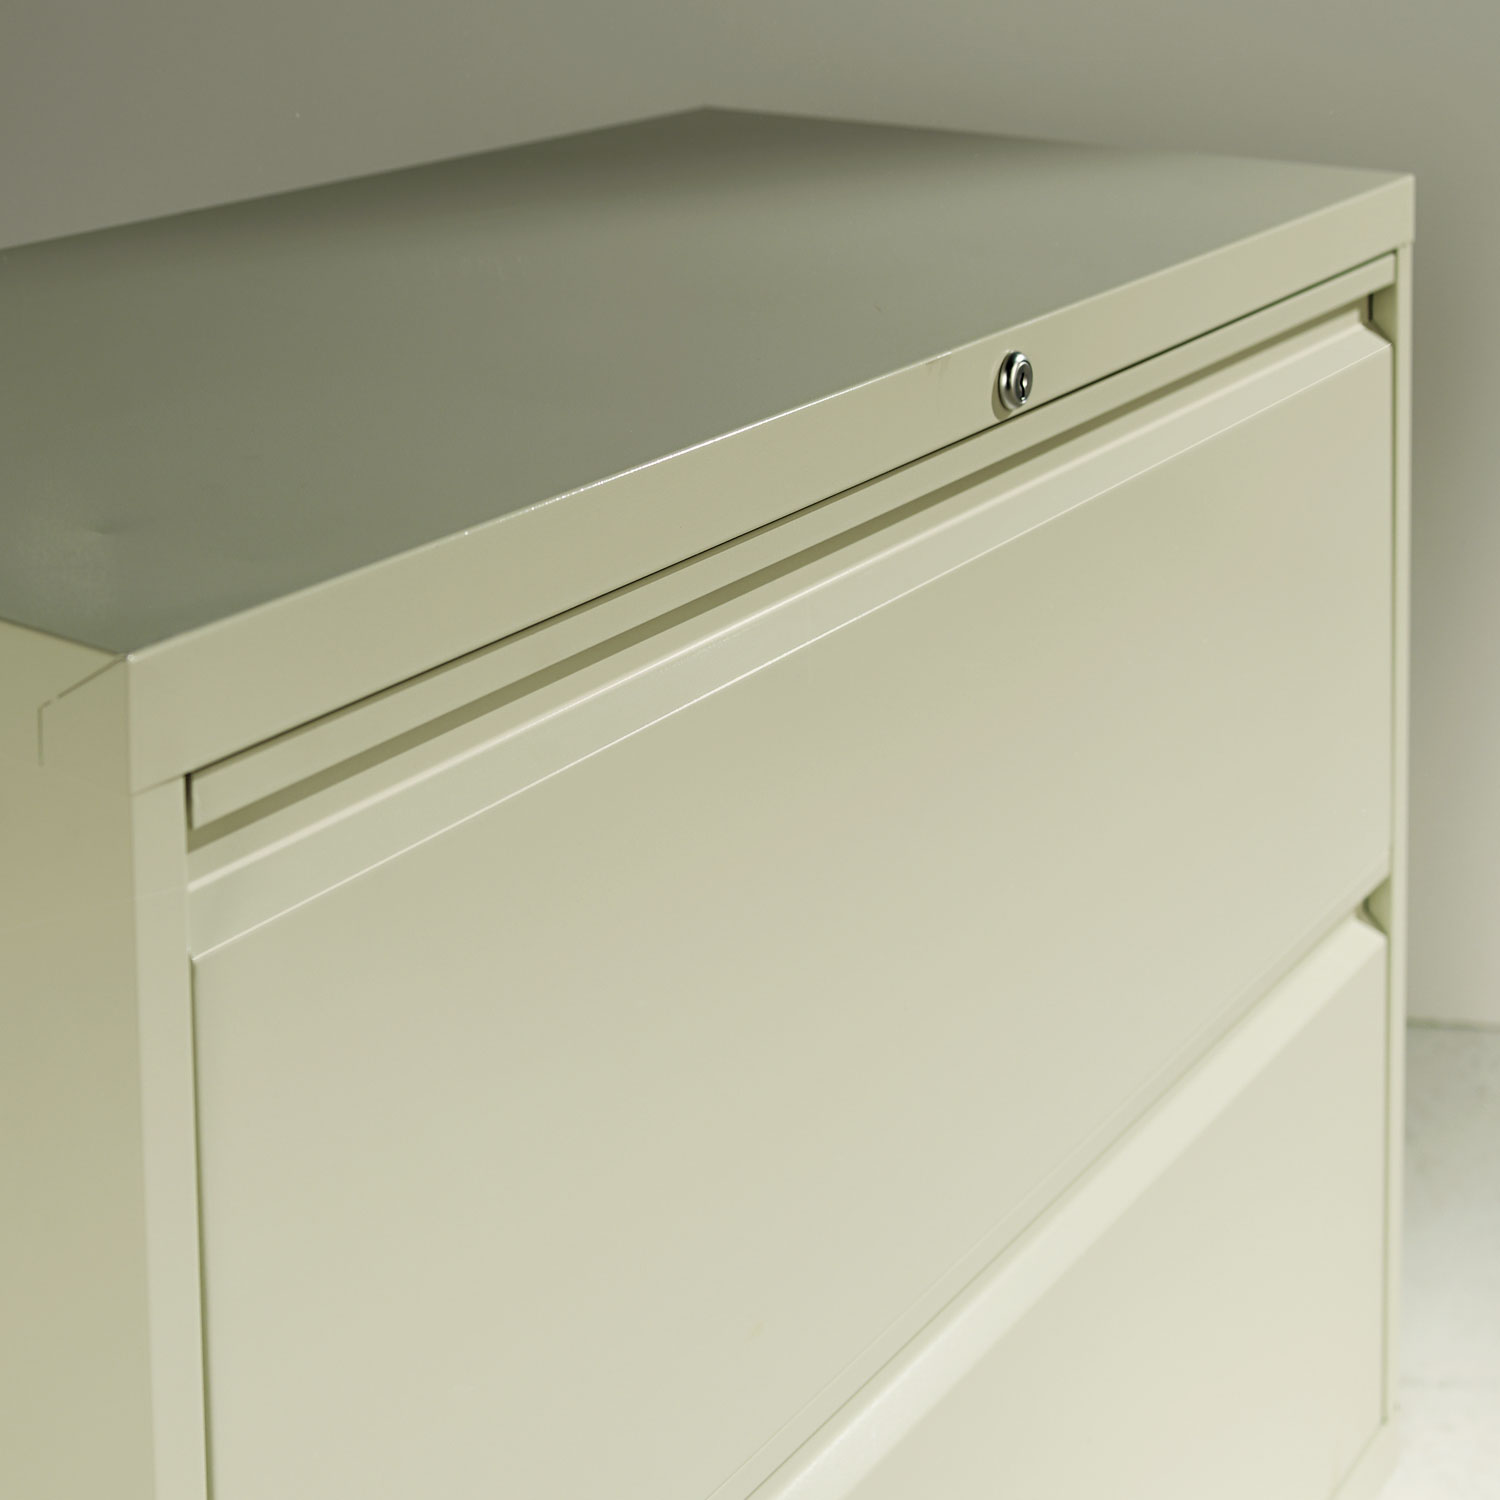 Alera Four-drawer Lateral File Cabinet, 36w X 18d X 52.5h, Light Gray - image 2 of 3